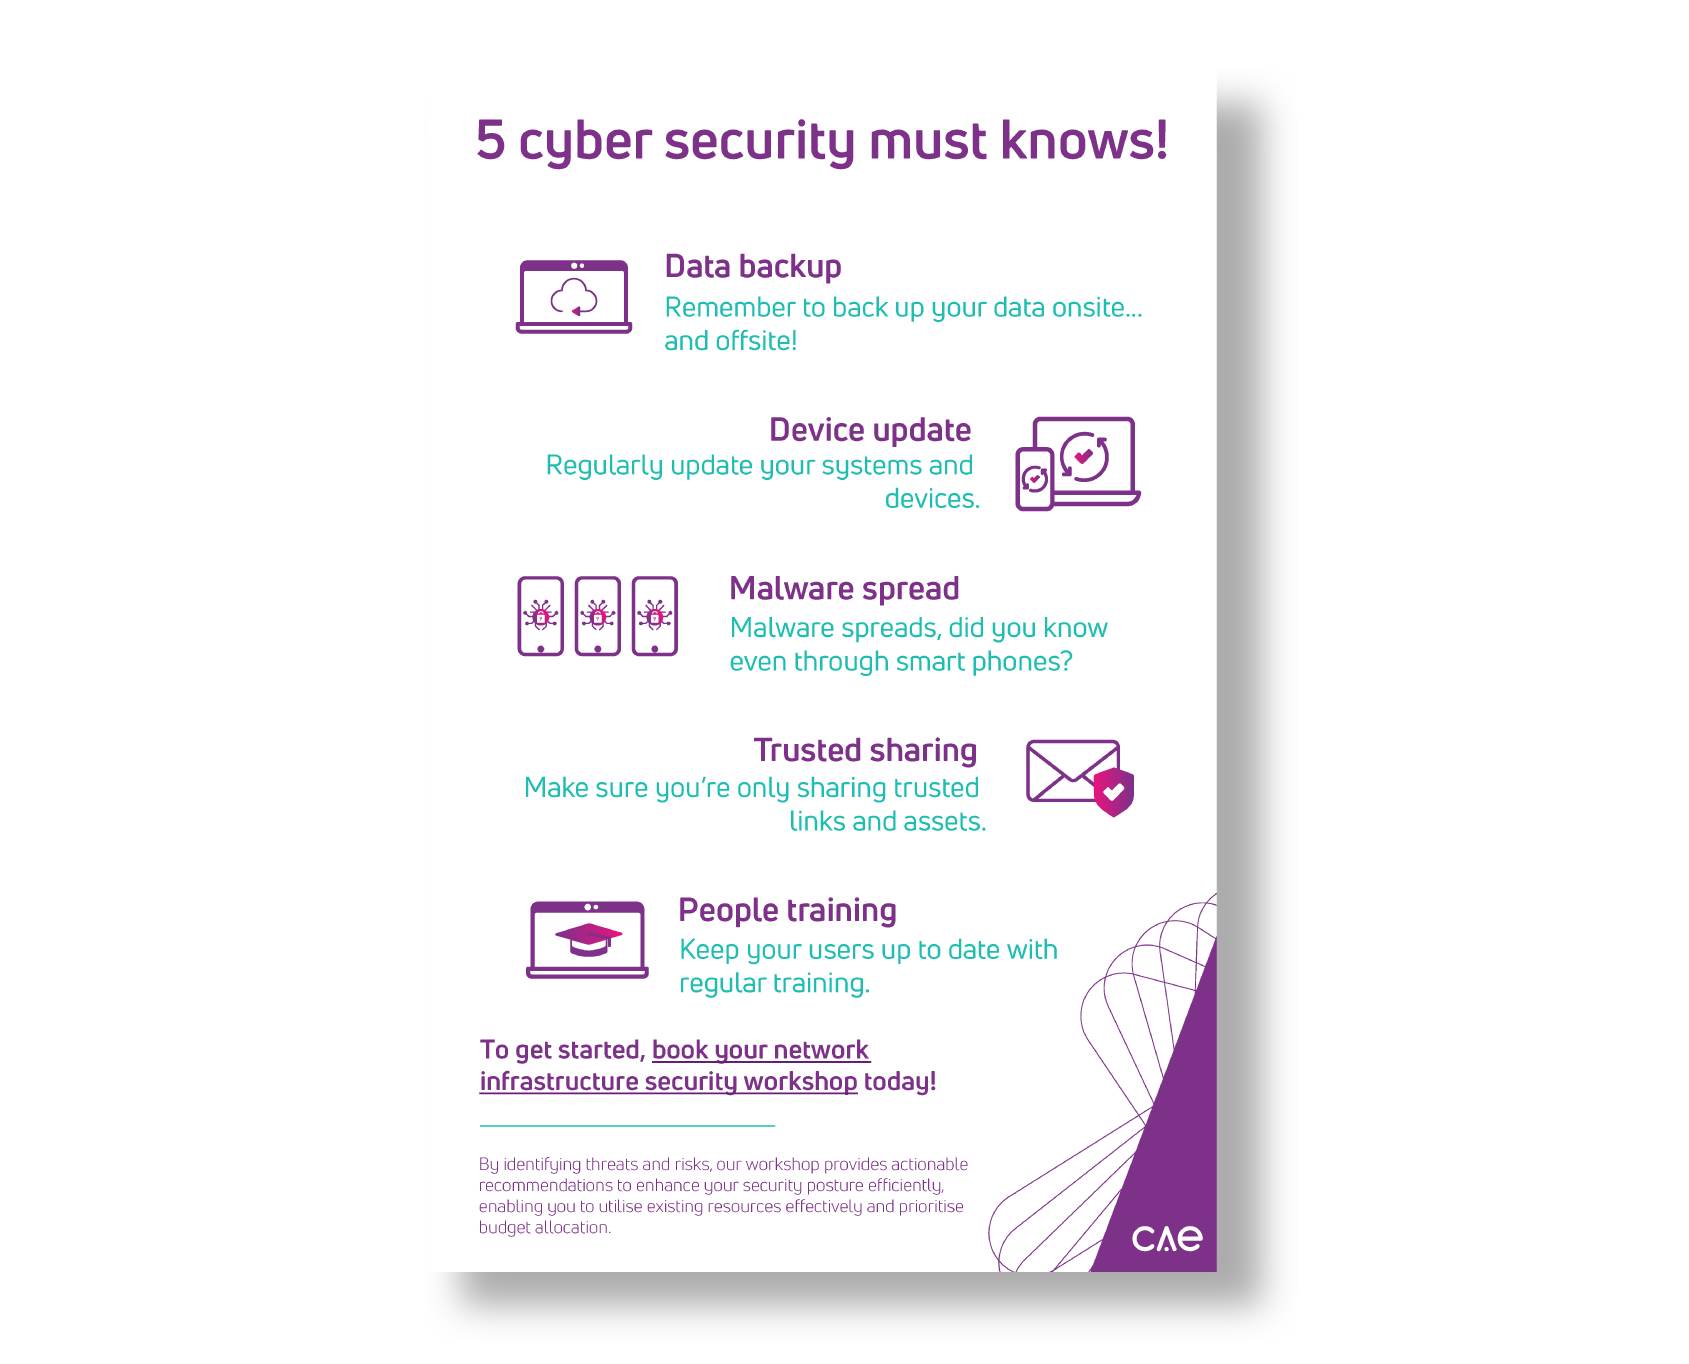 5 cyber security must knows cover image